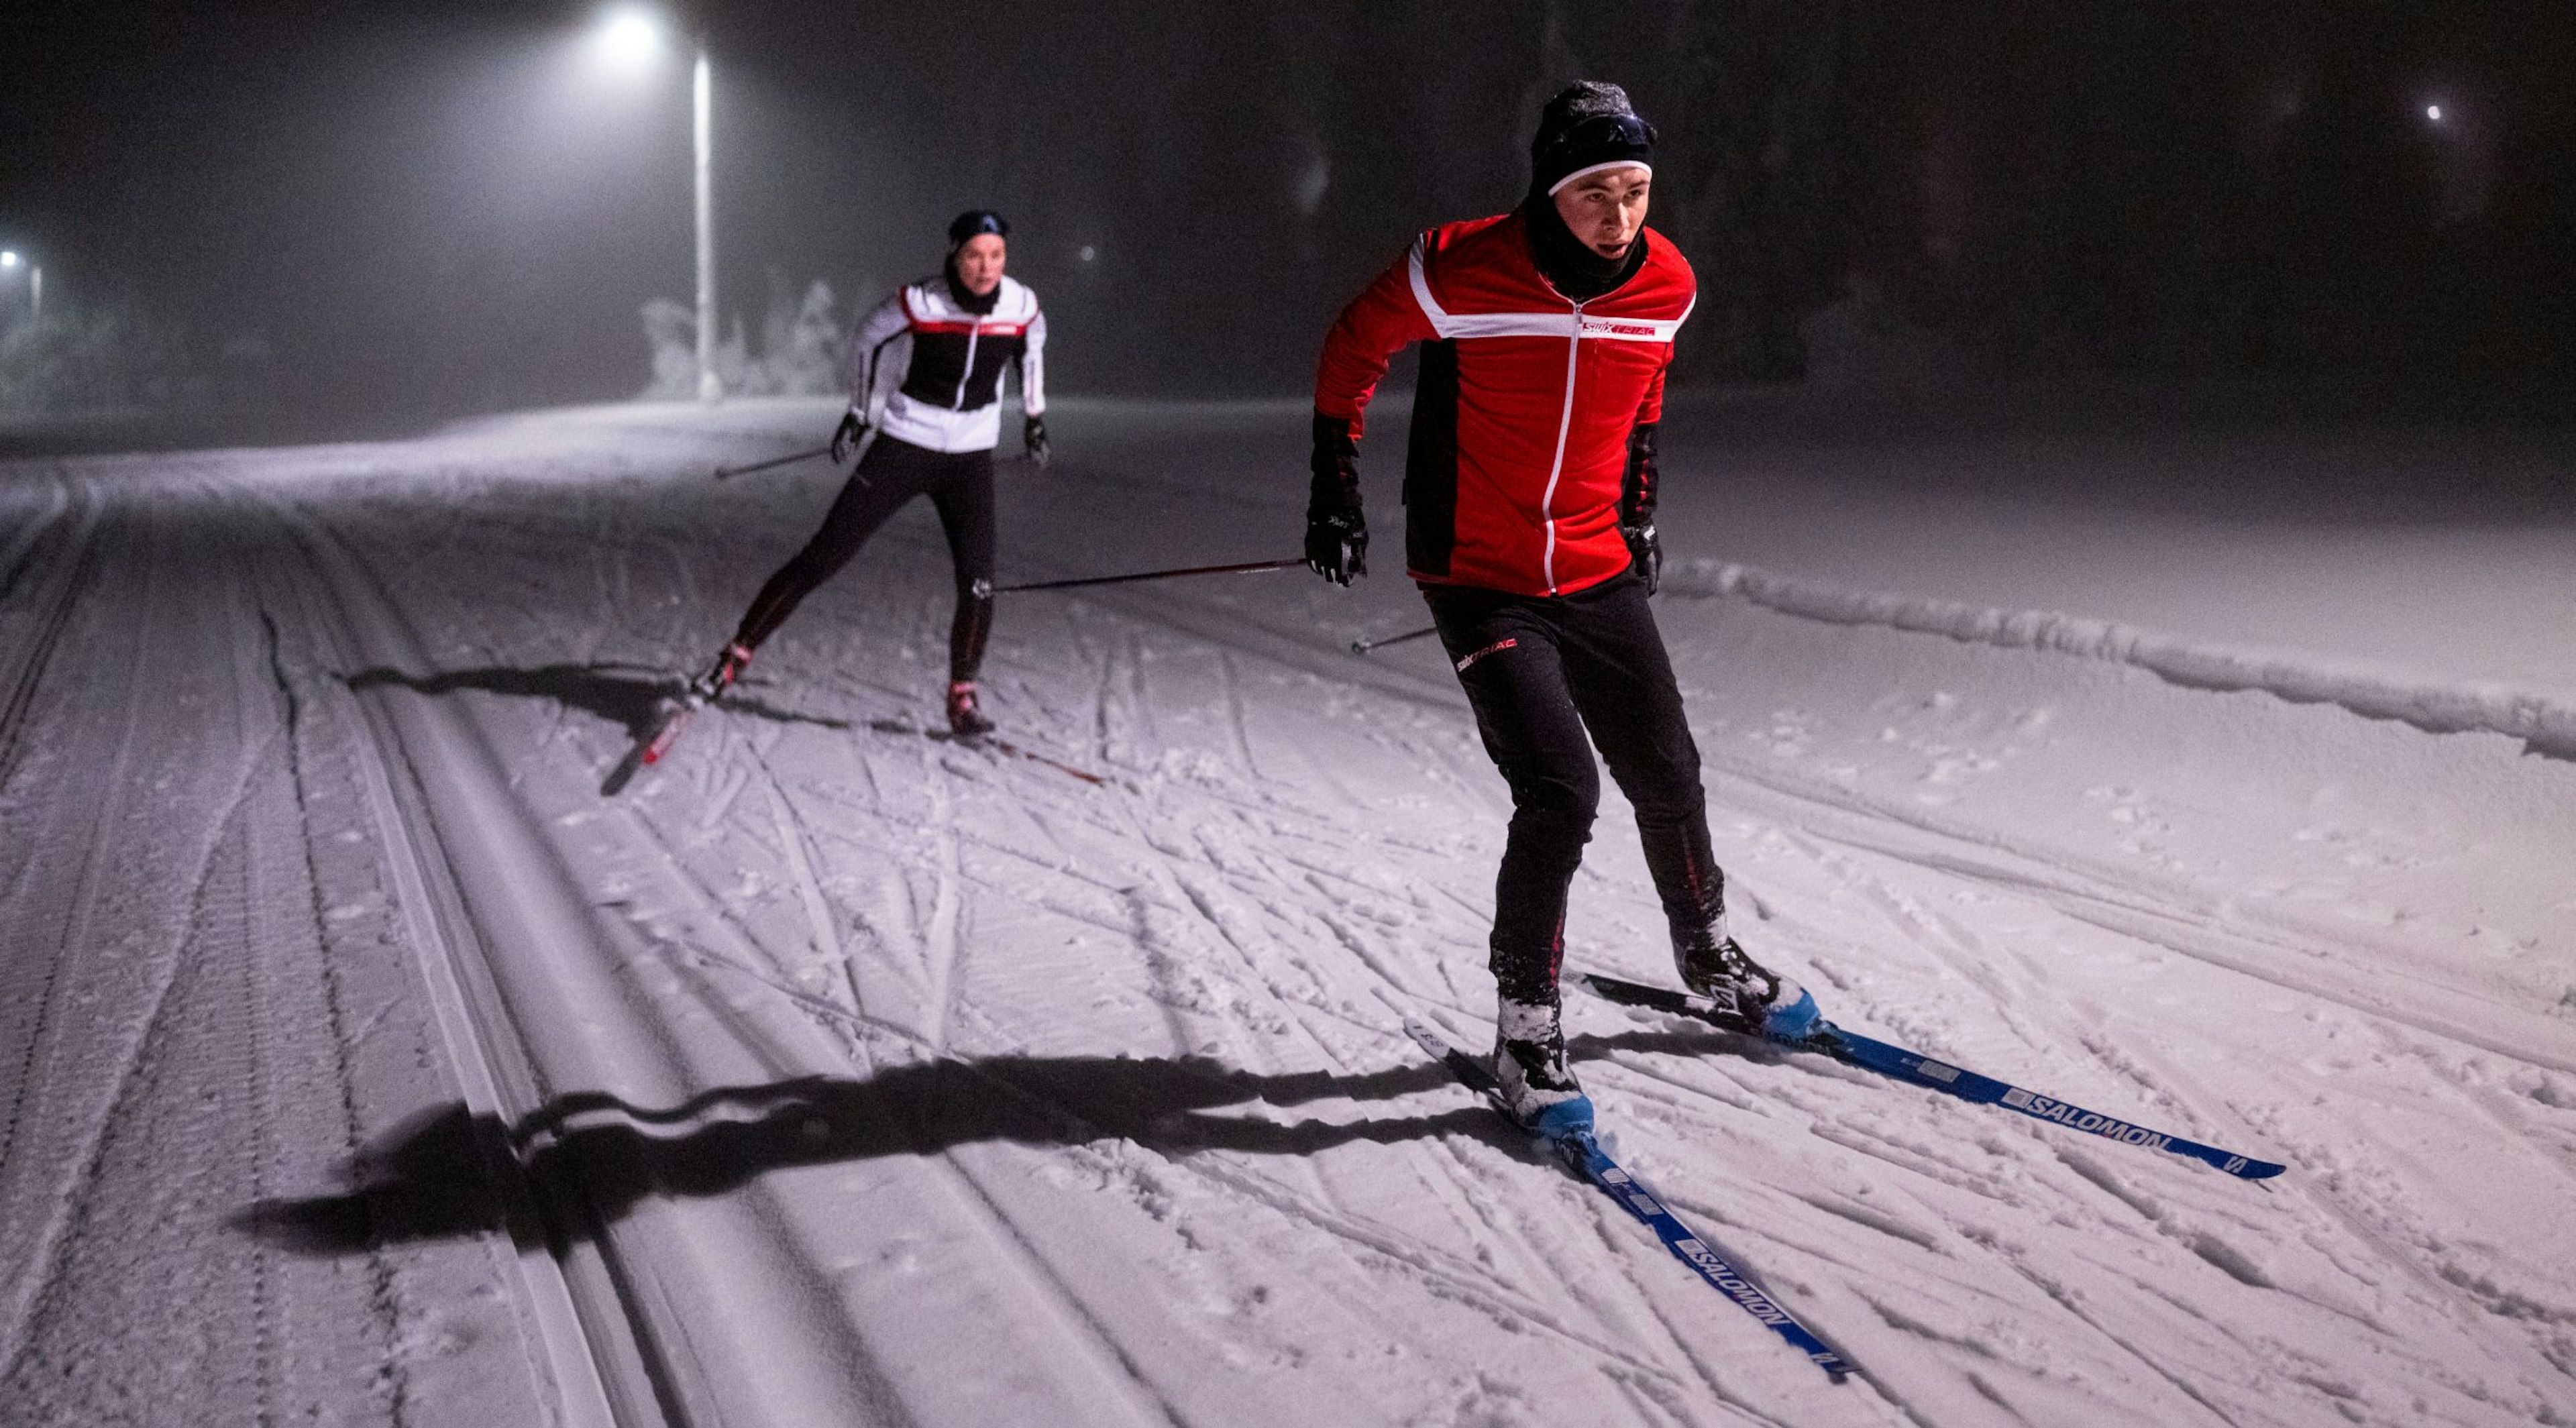 Man and women cross country skiing